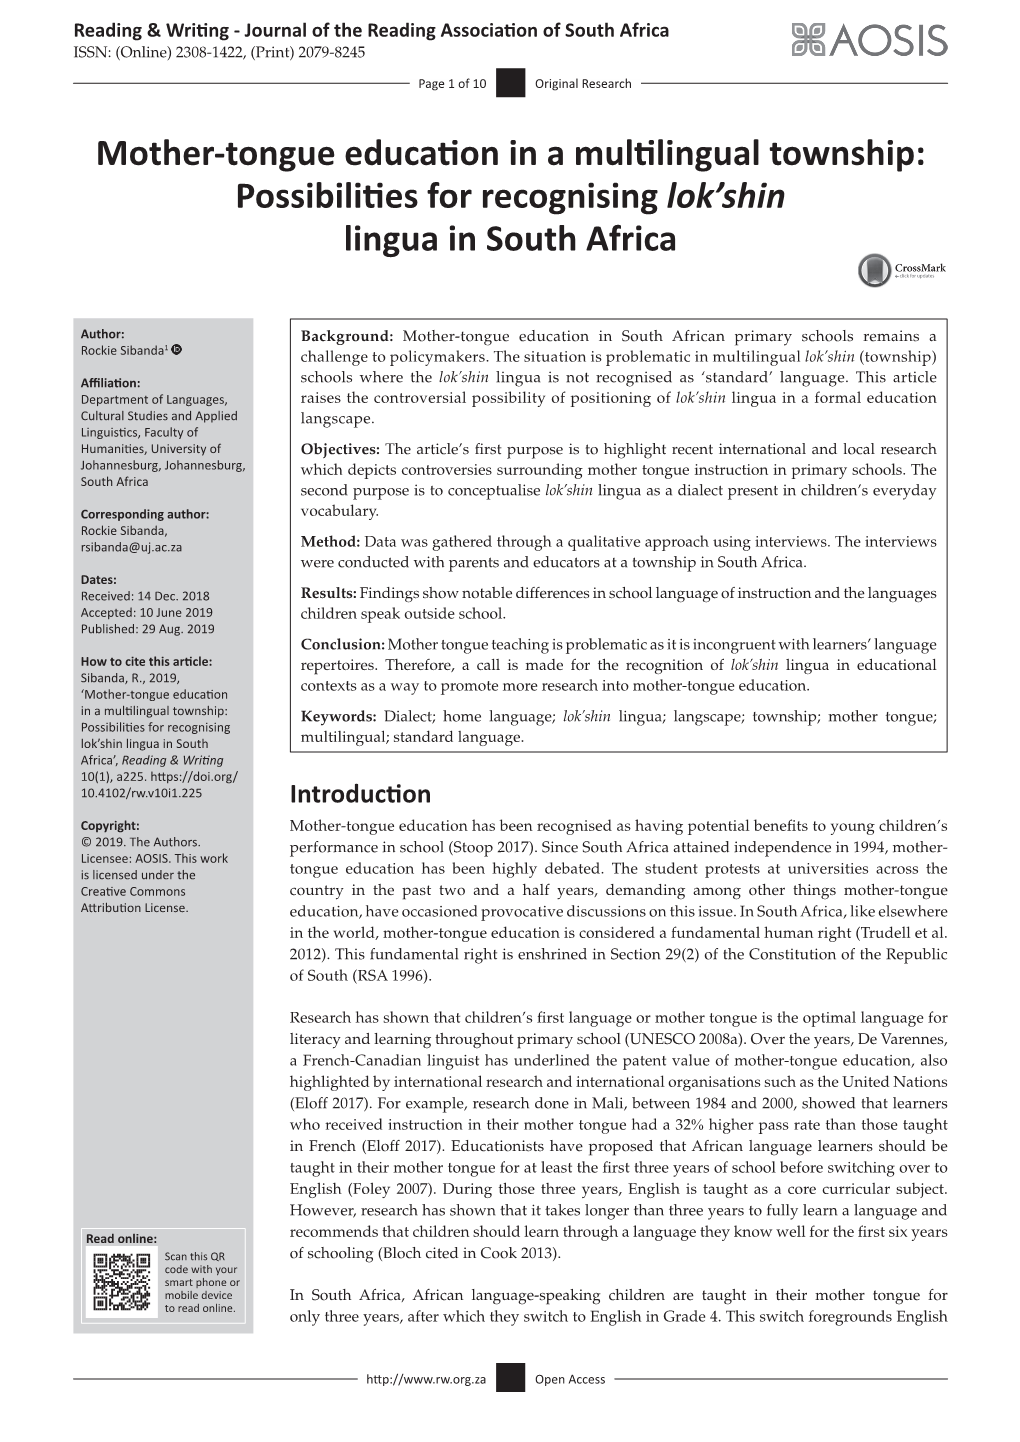 Mother-Tongue Education in a Multilingual Township: Possibilities for Recognising Lok'shin Lingua in South Africa